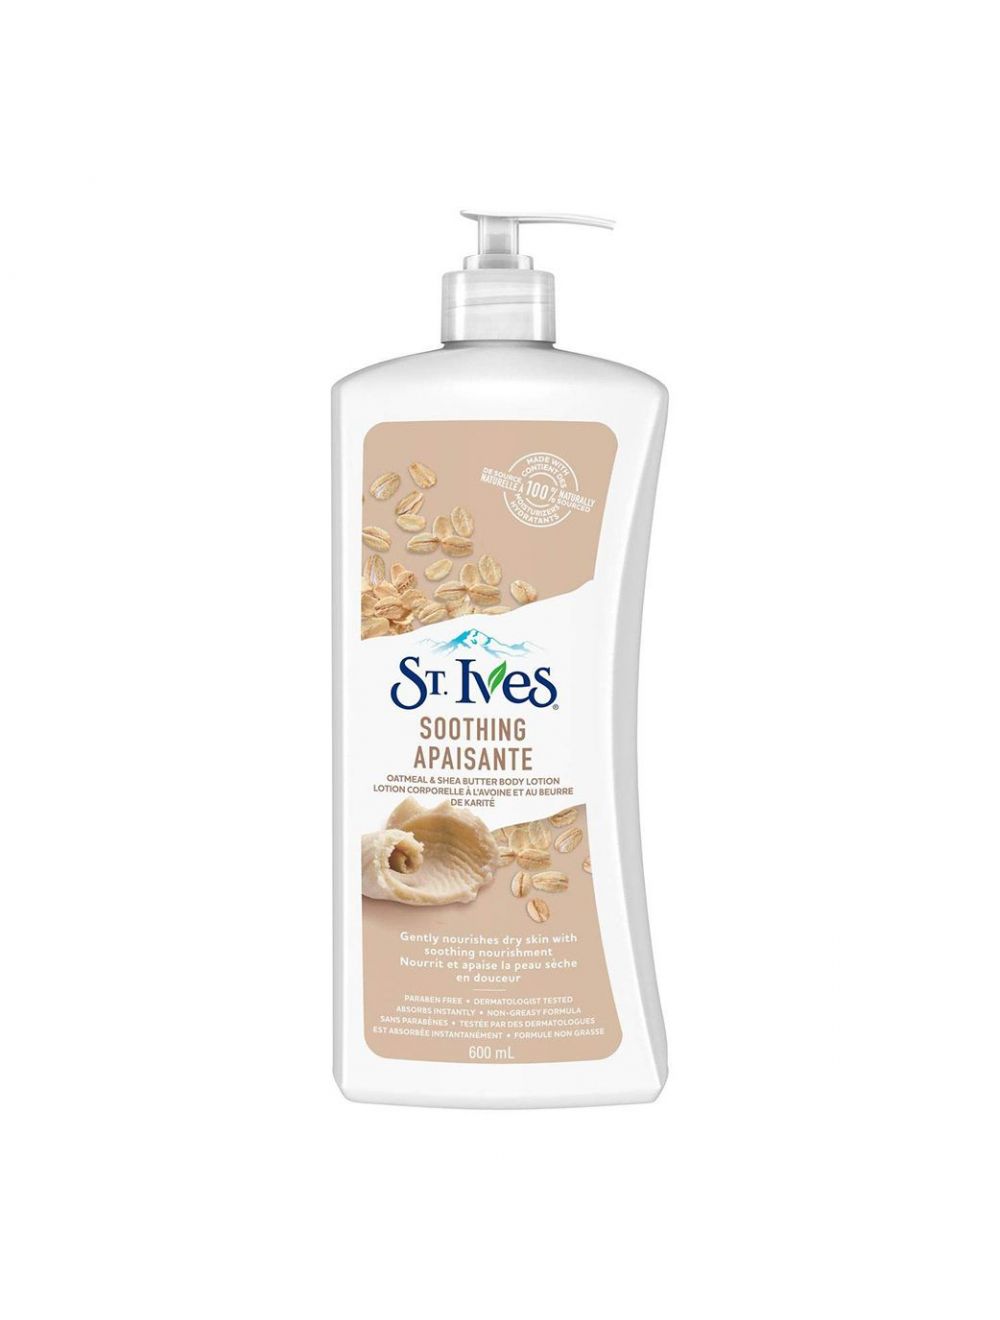 St. Ives Soothing Oatmeal & Shea Butter Body Lotion (621ml)